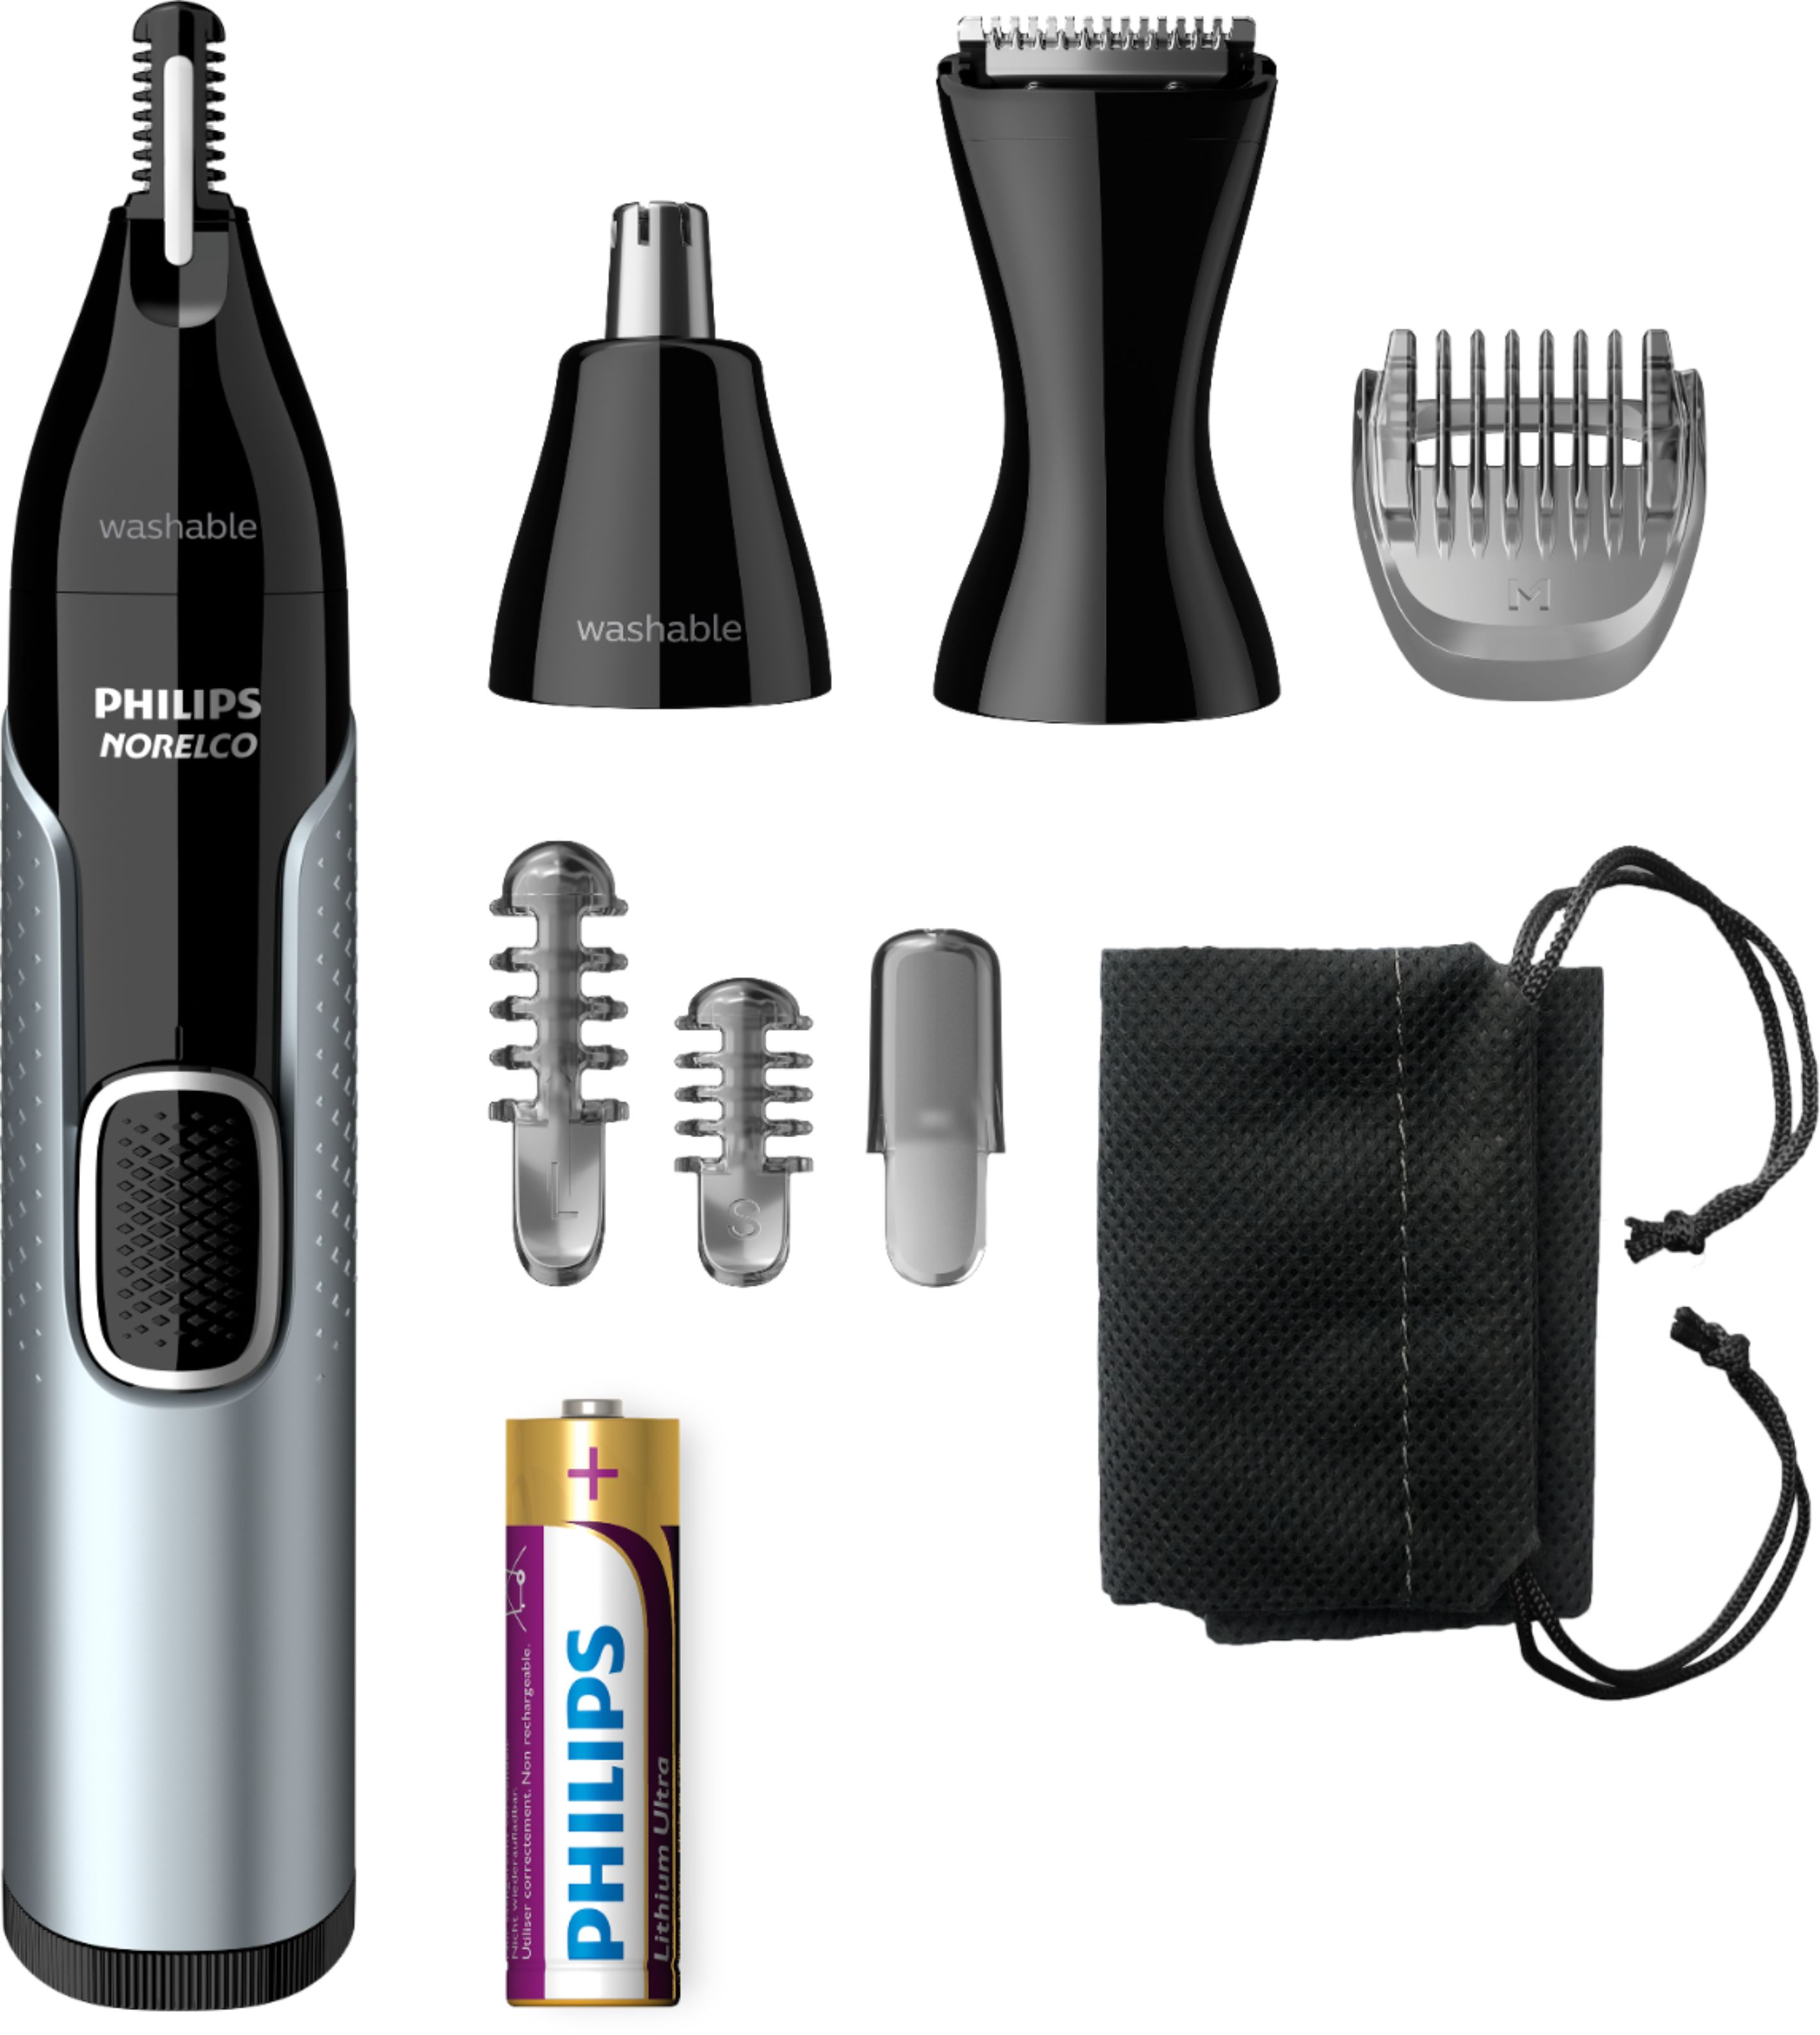 Philips Norelco Nose Trimmer Black/Silver NT5600/42US - Best Buy